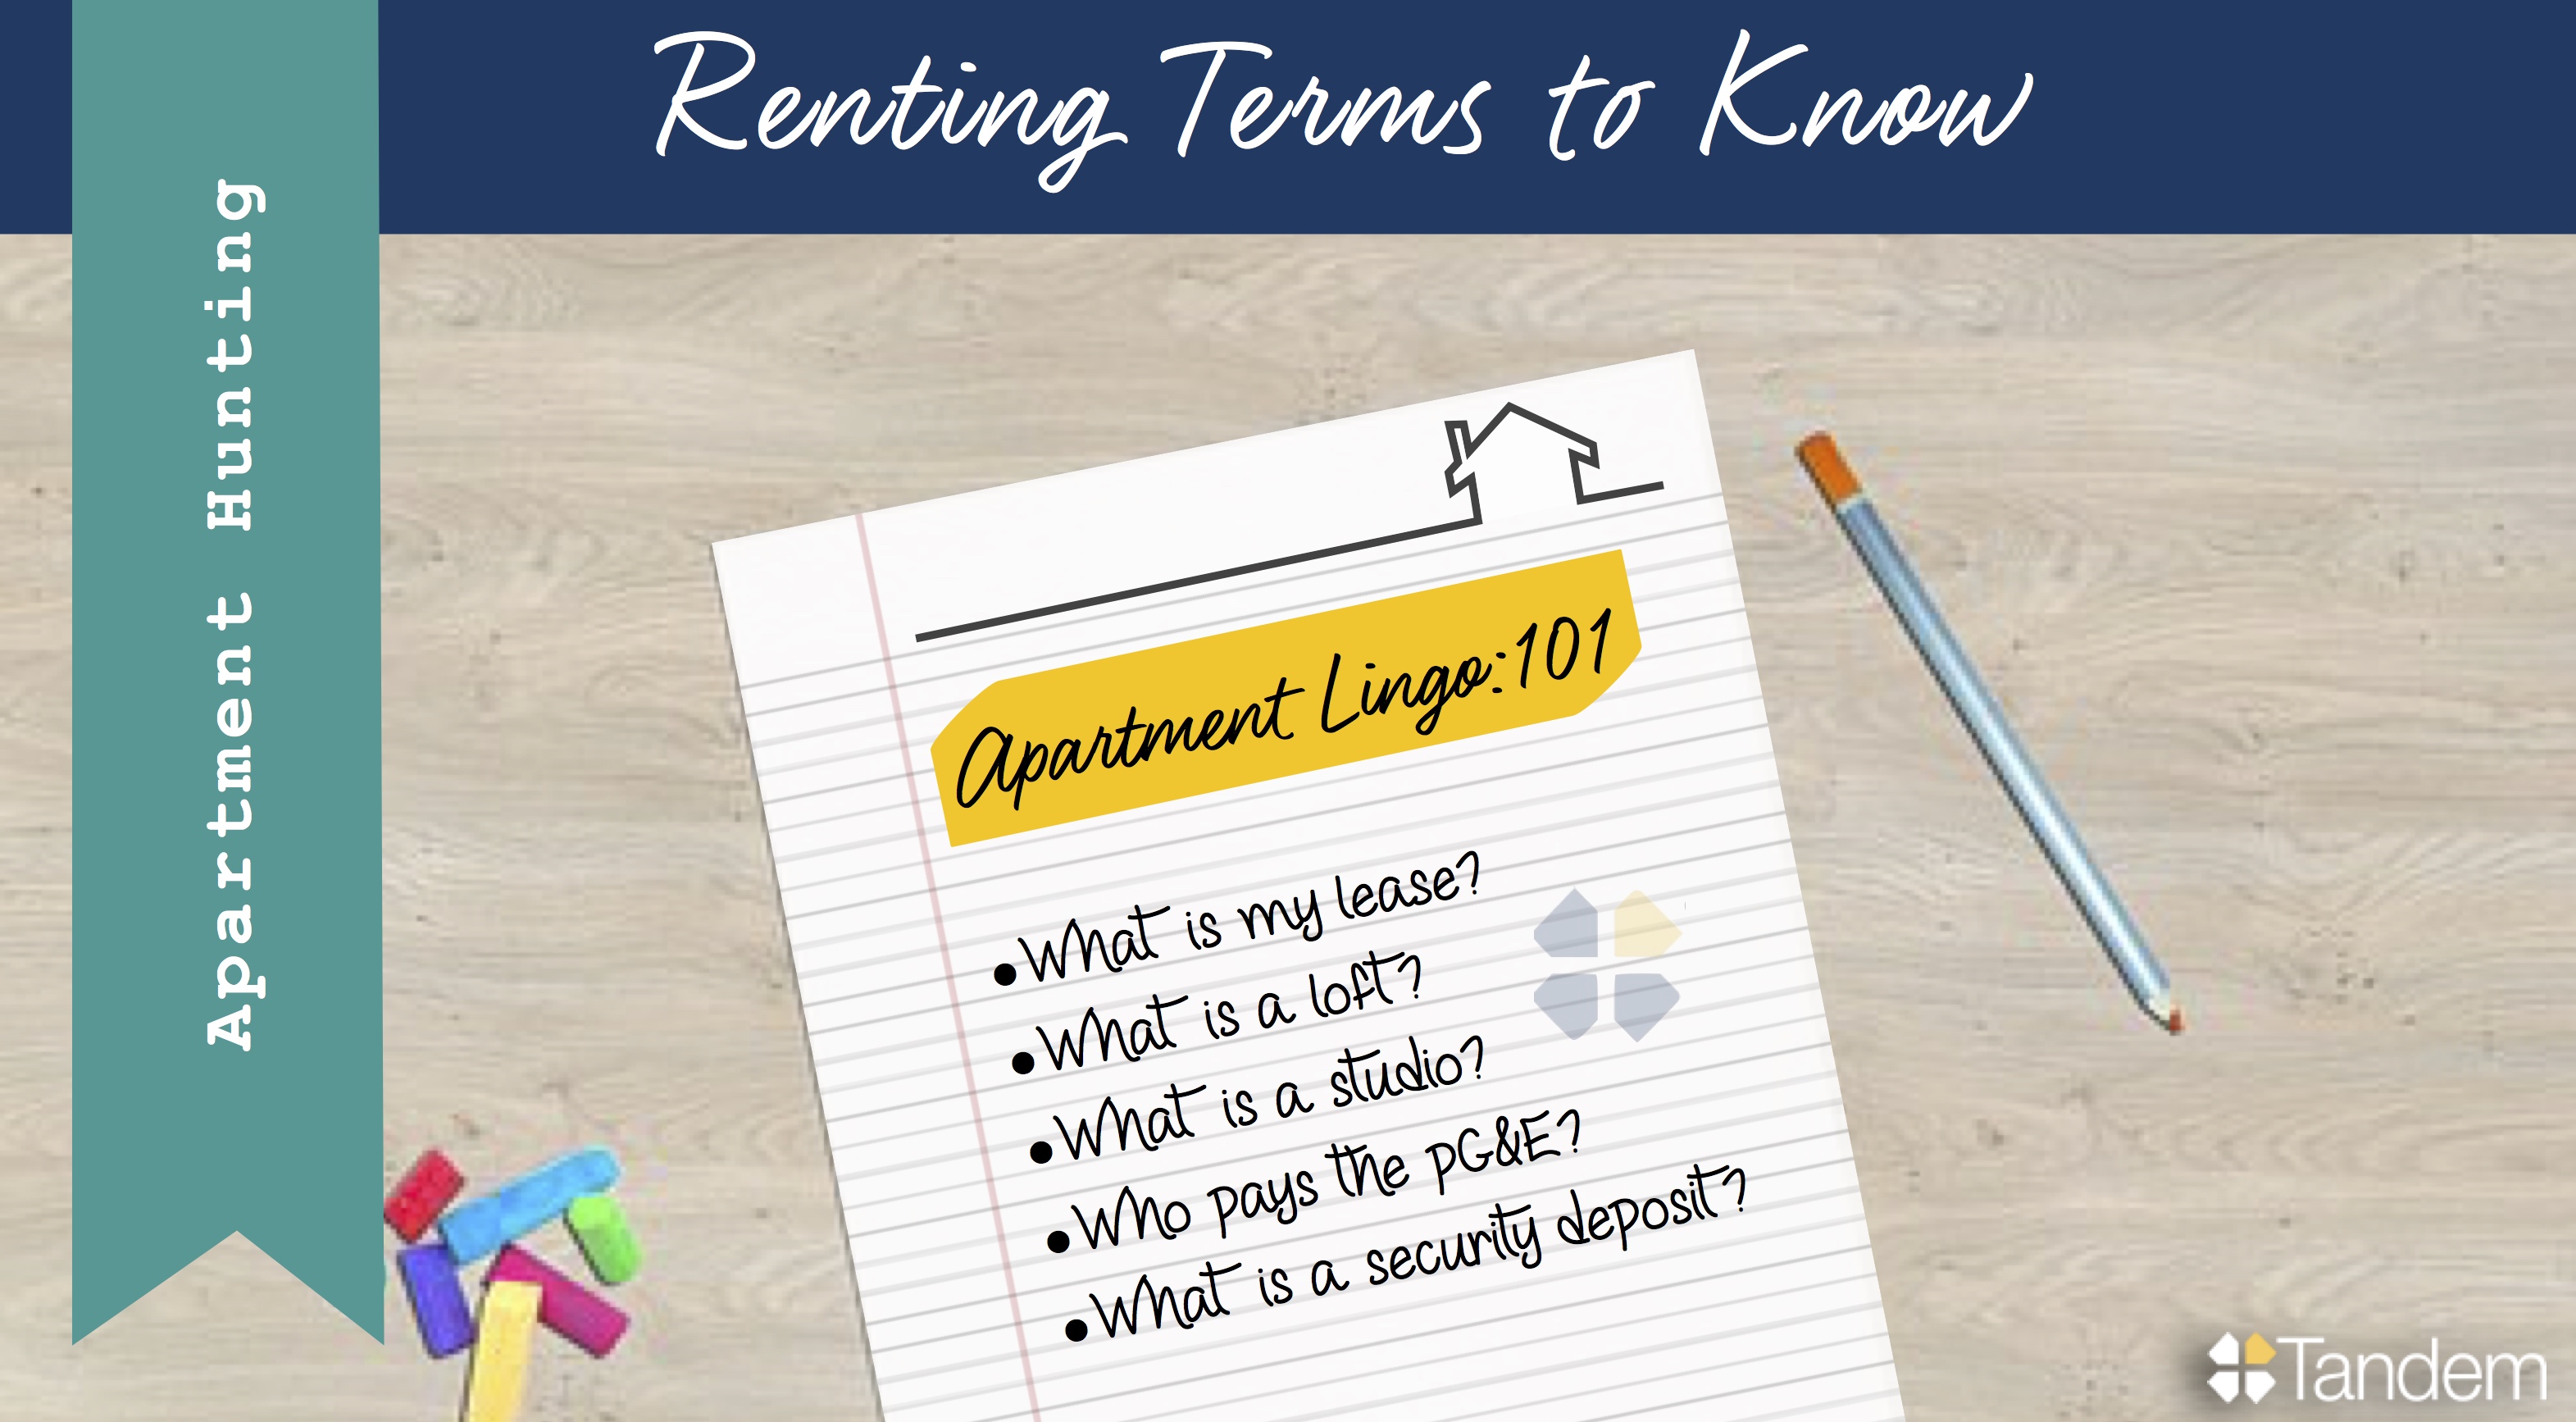 Davis Apartment Renting Terms to Know